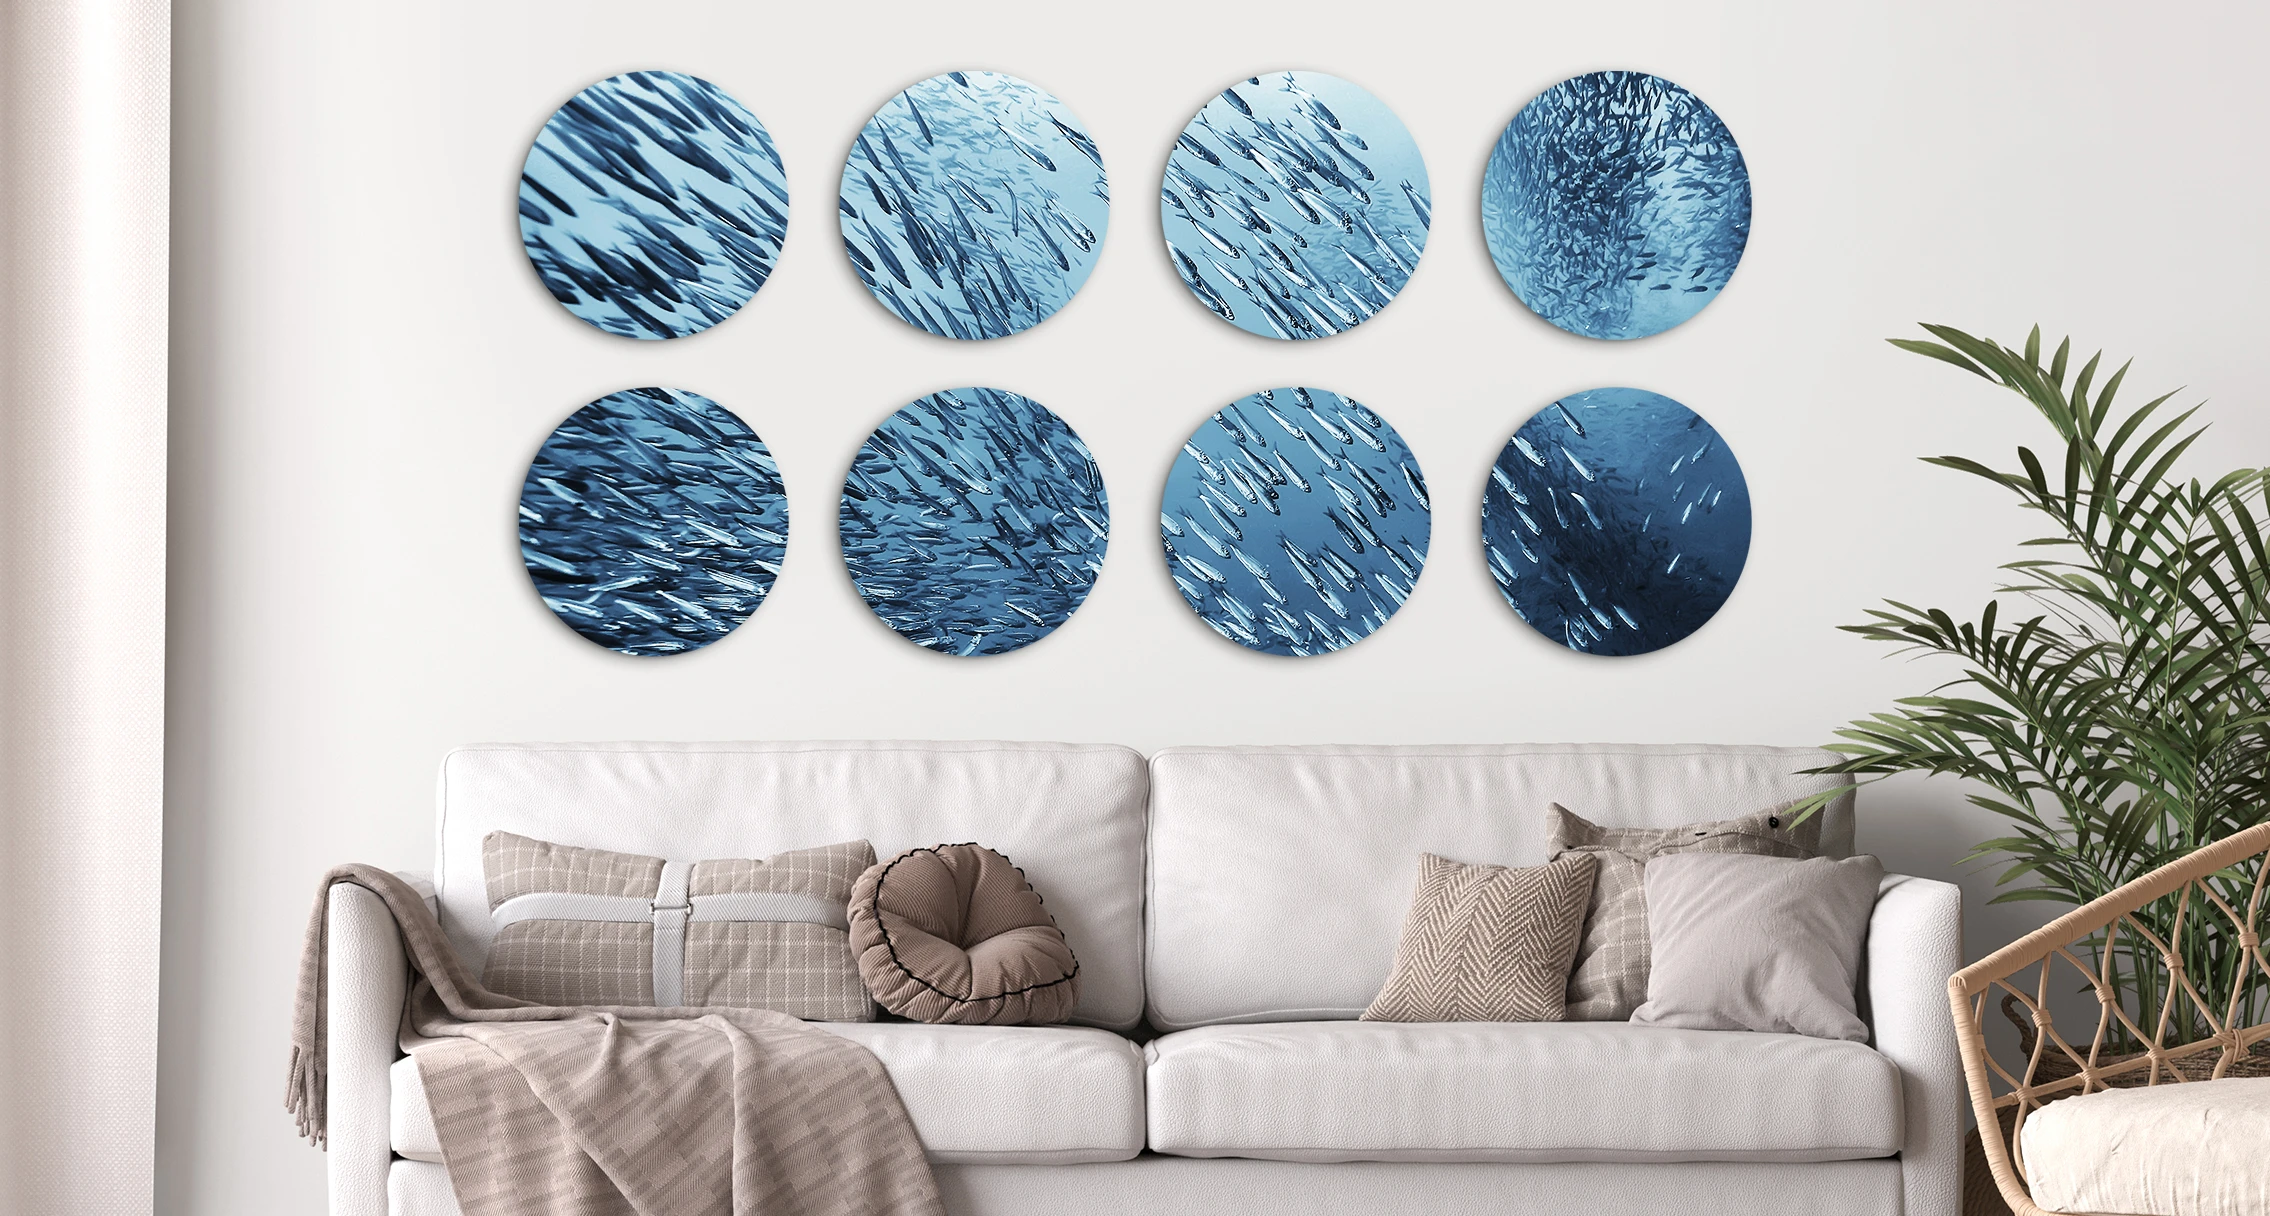 The motif of schooling fish can be seen on 8 different round pictures, which are hung next to each other in two rows on a wall. 